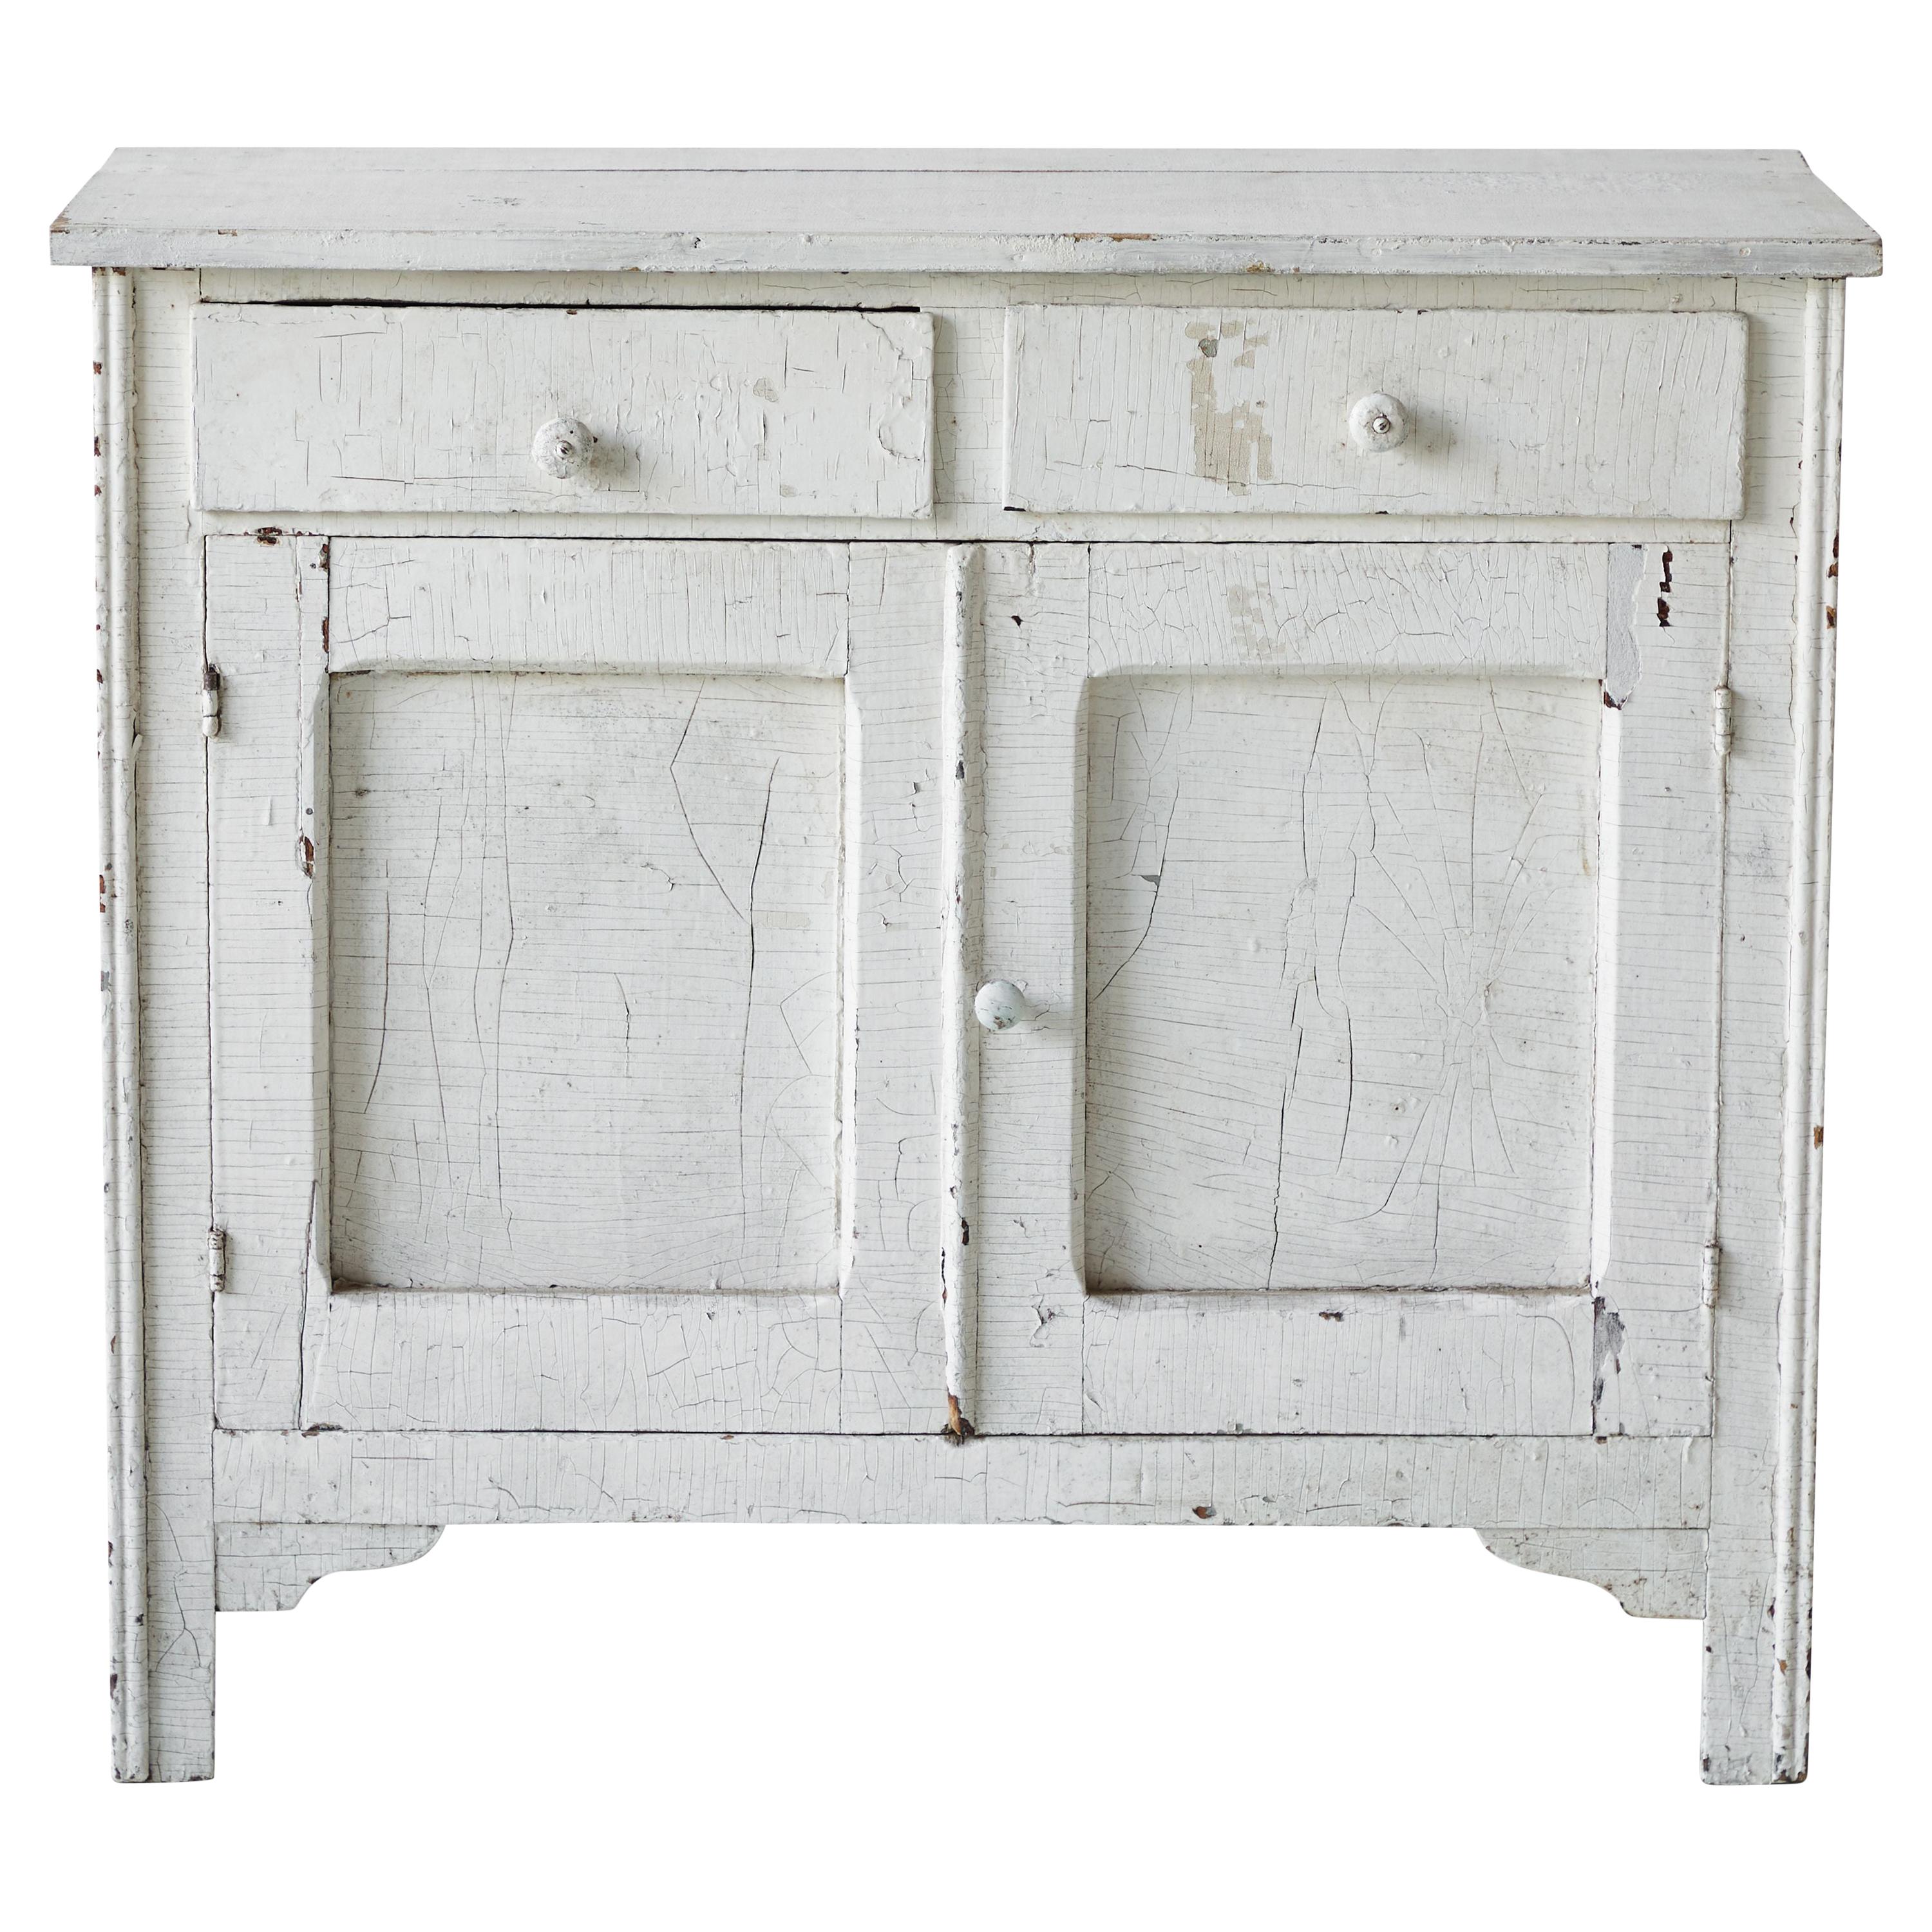 Early American White Painted Server